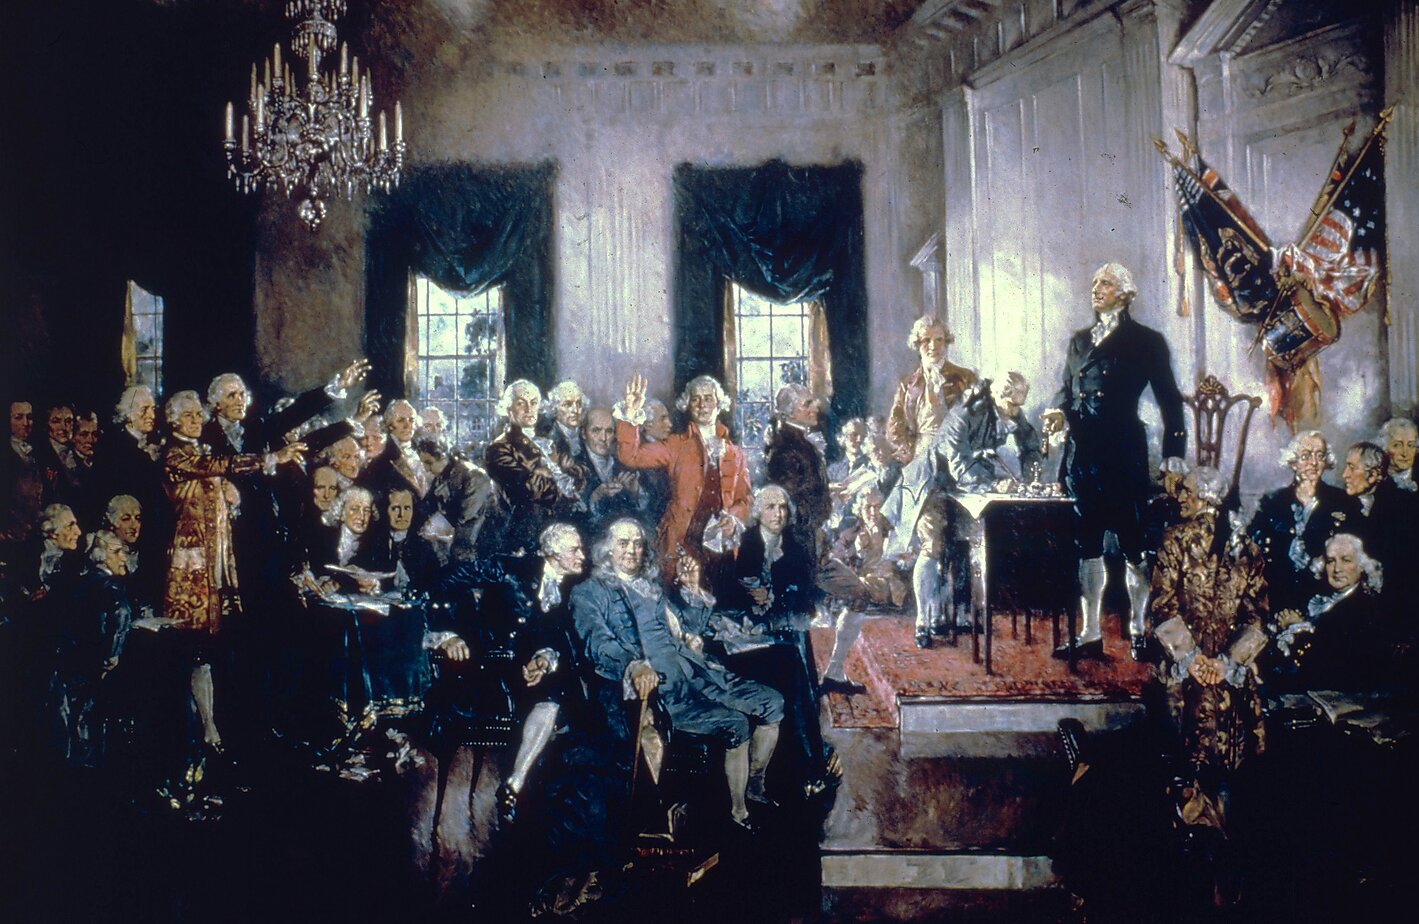 Painting of the signing of the U.S. constitution in 1787.